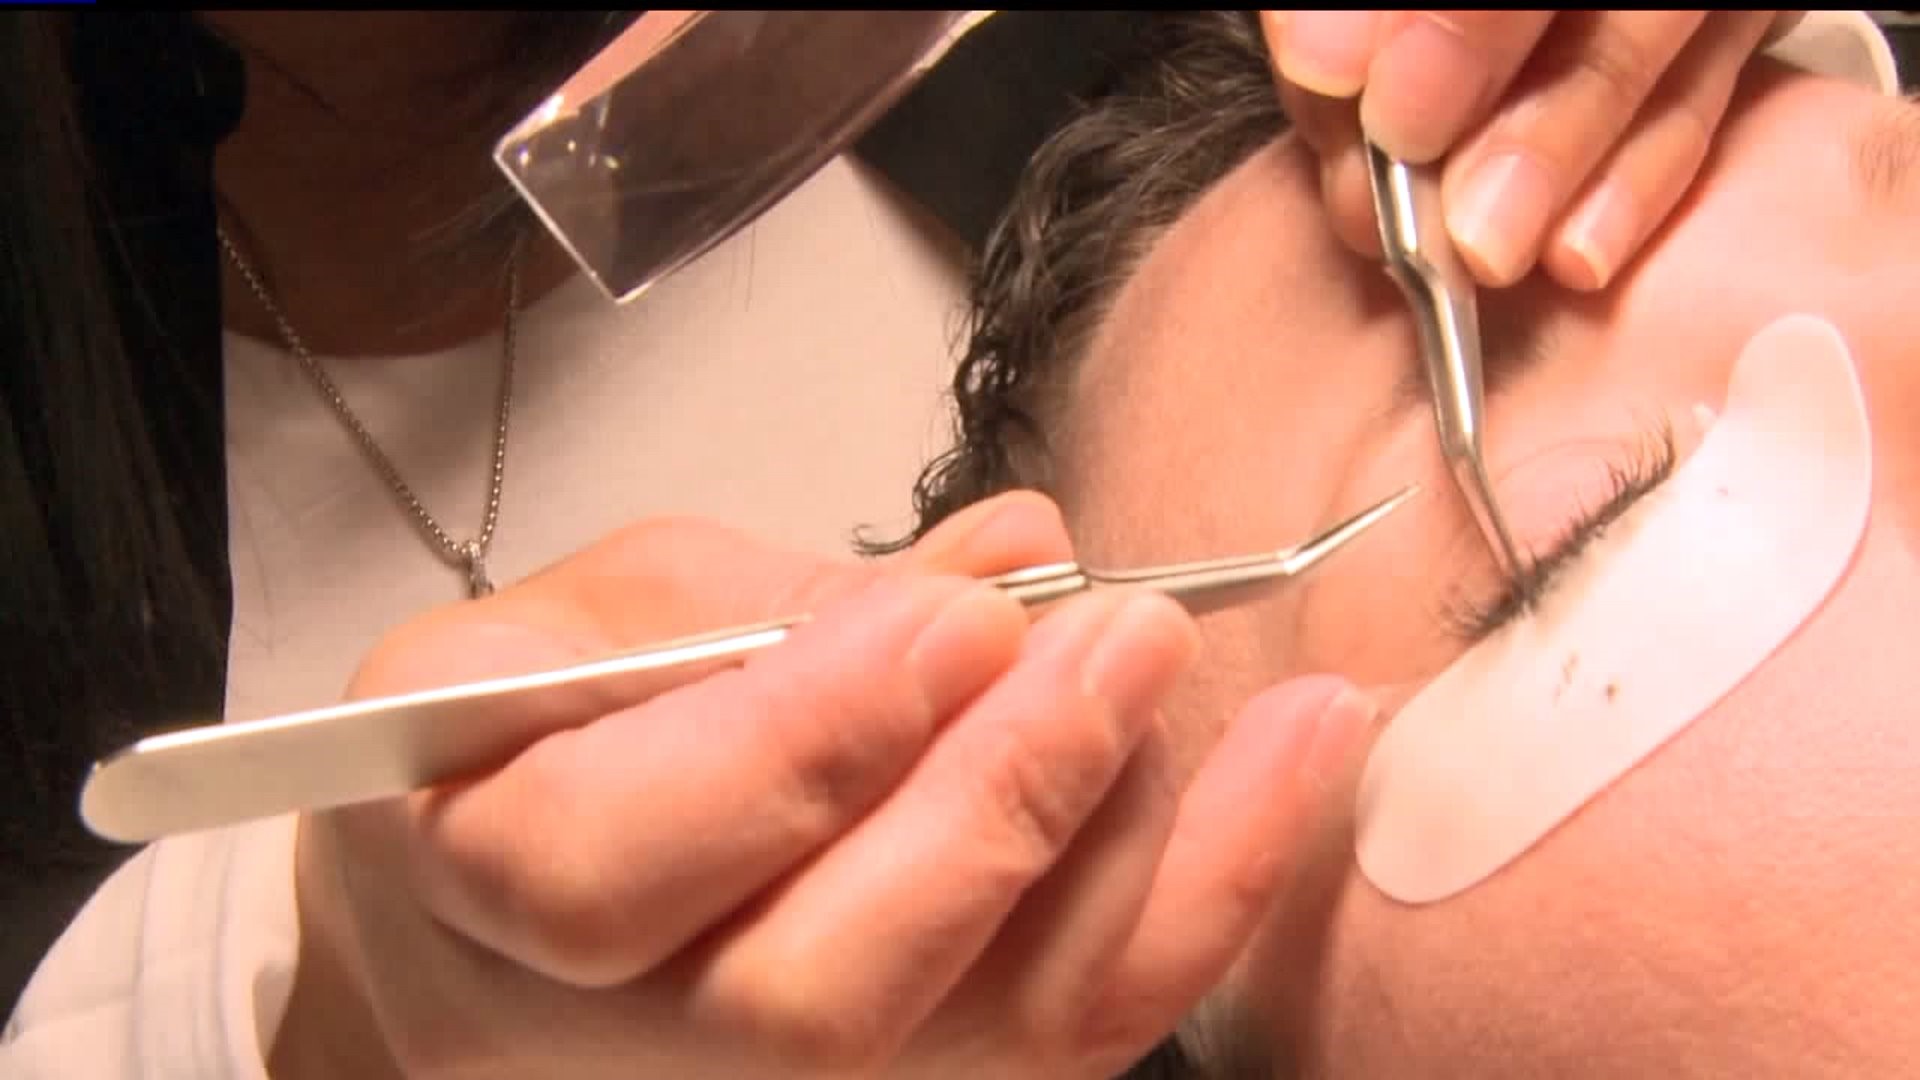 Lancaster Co. eyelash salon gives free lashes to cancer patients